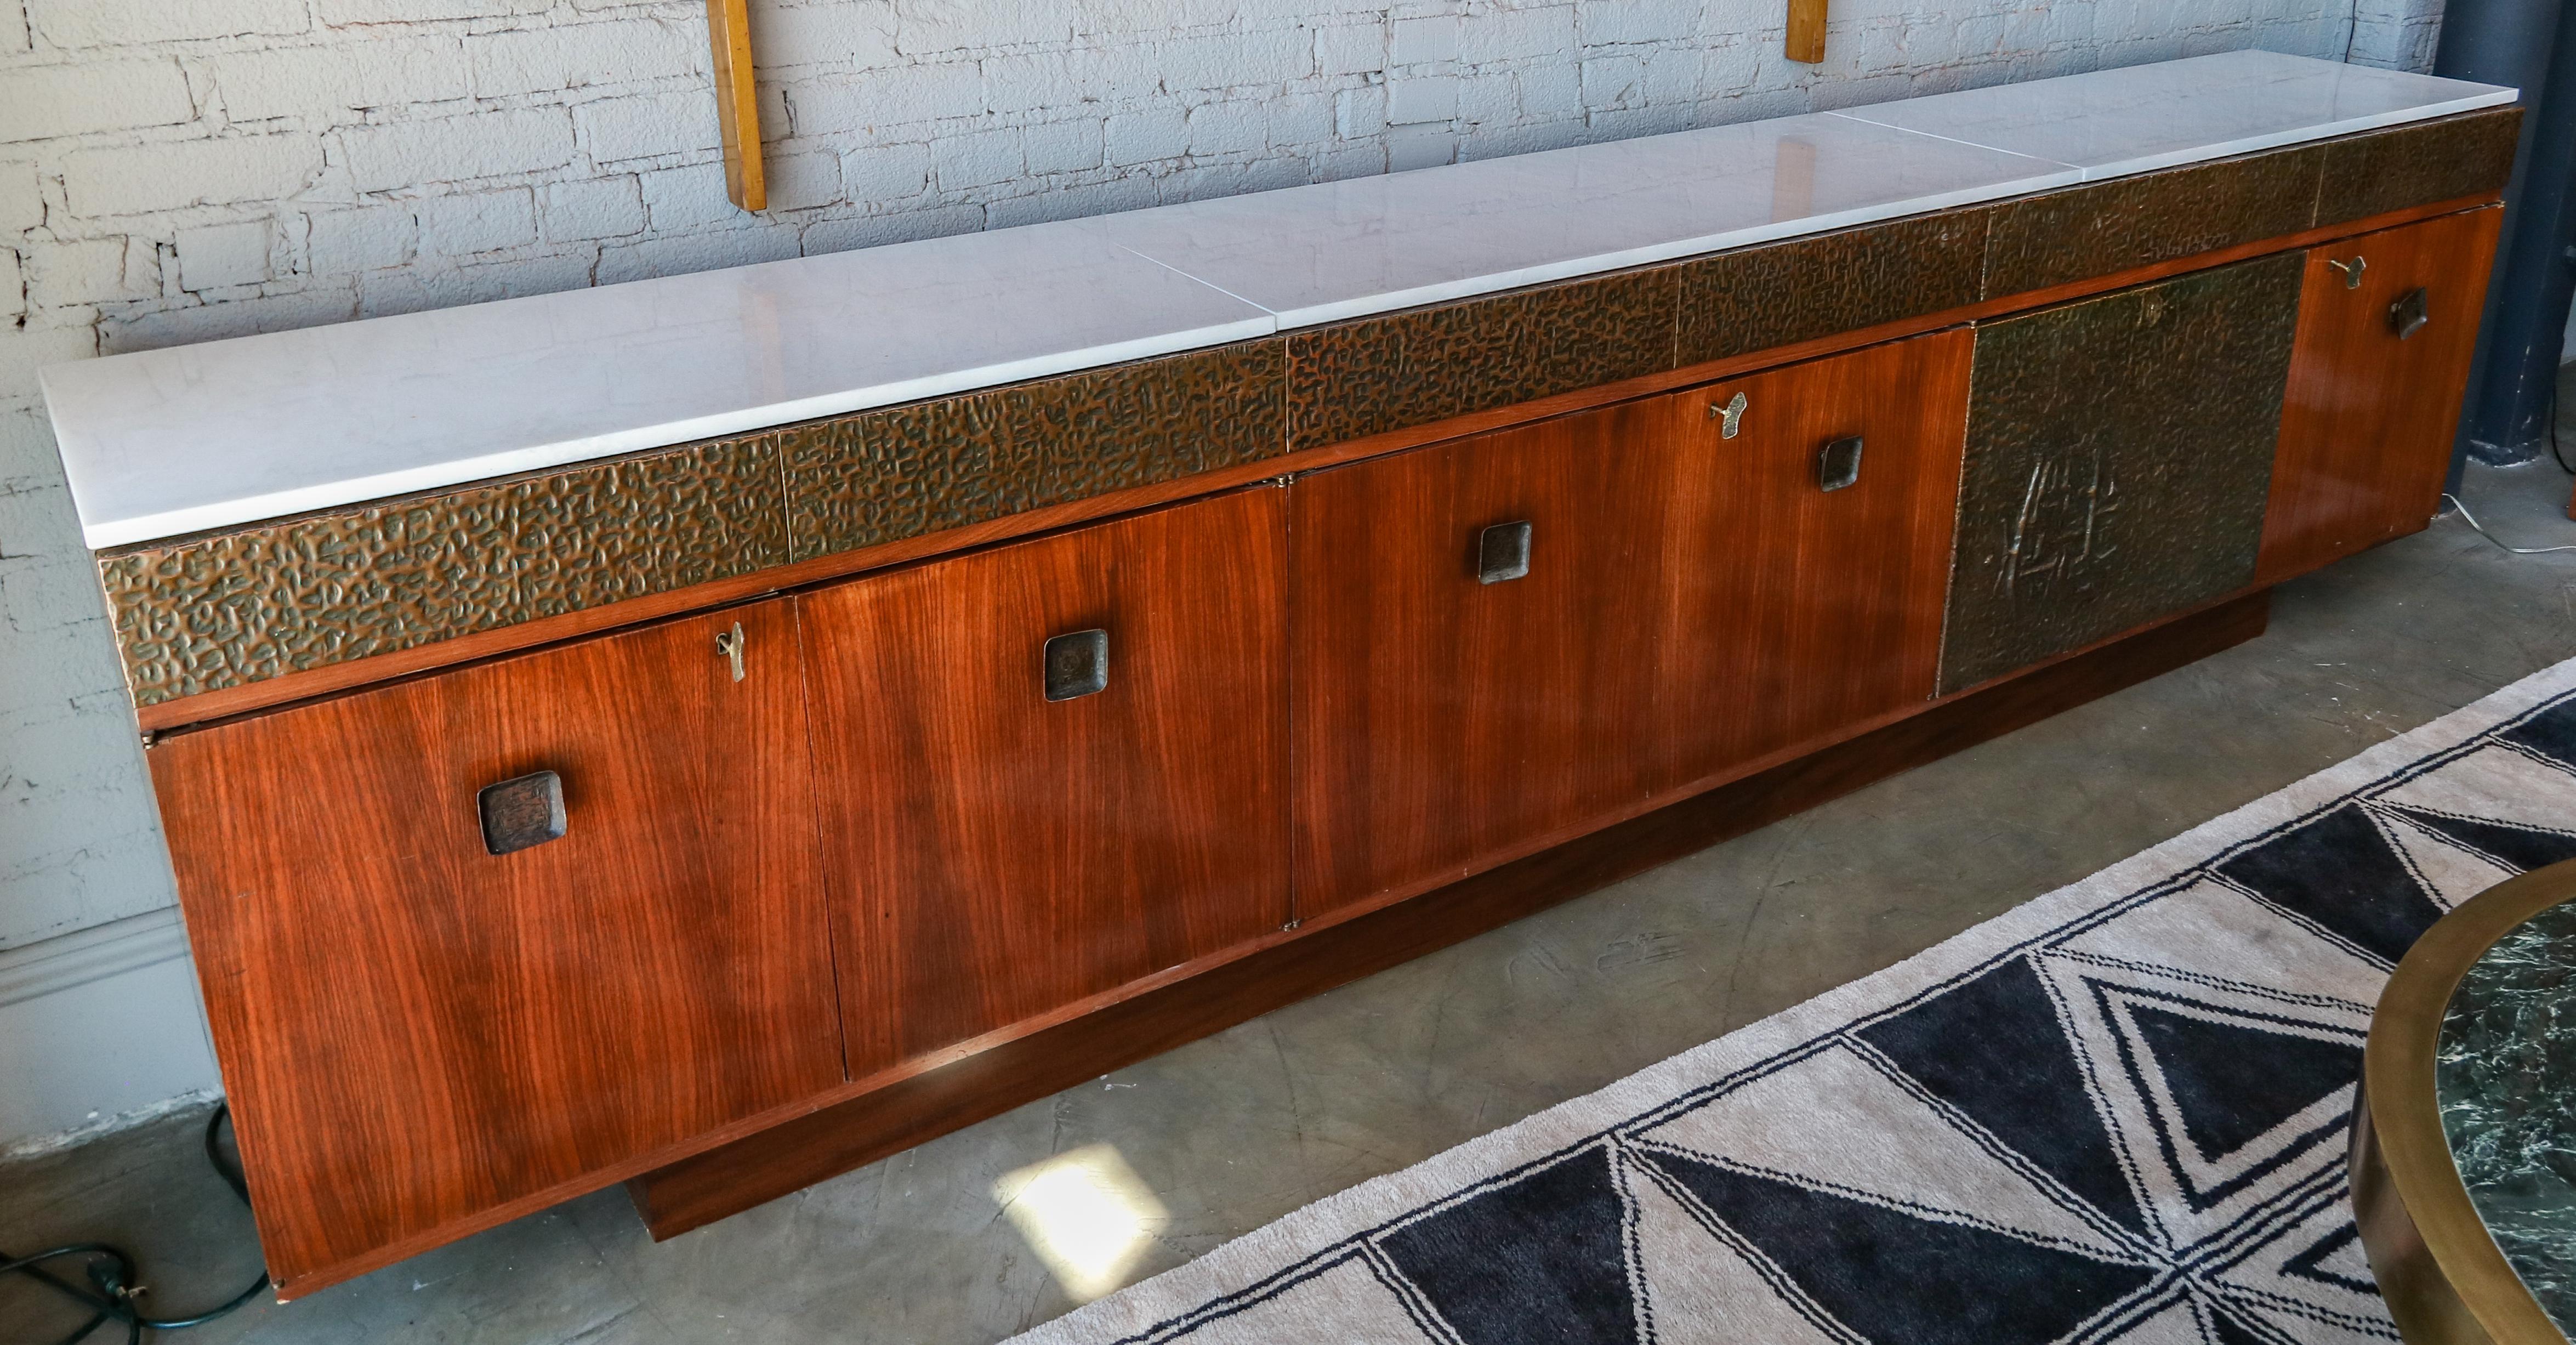 Long Brazilian rosewood sideboard and dry bar by Bernardo Figueiredo with lighted white onyx top and brass details. Cabinet custom made for an apartment in Rio de Janeiro completely done by Figueiredo.